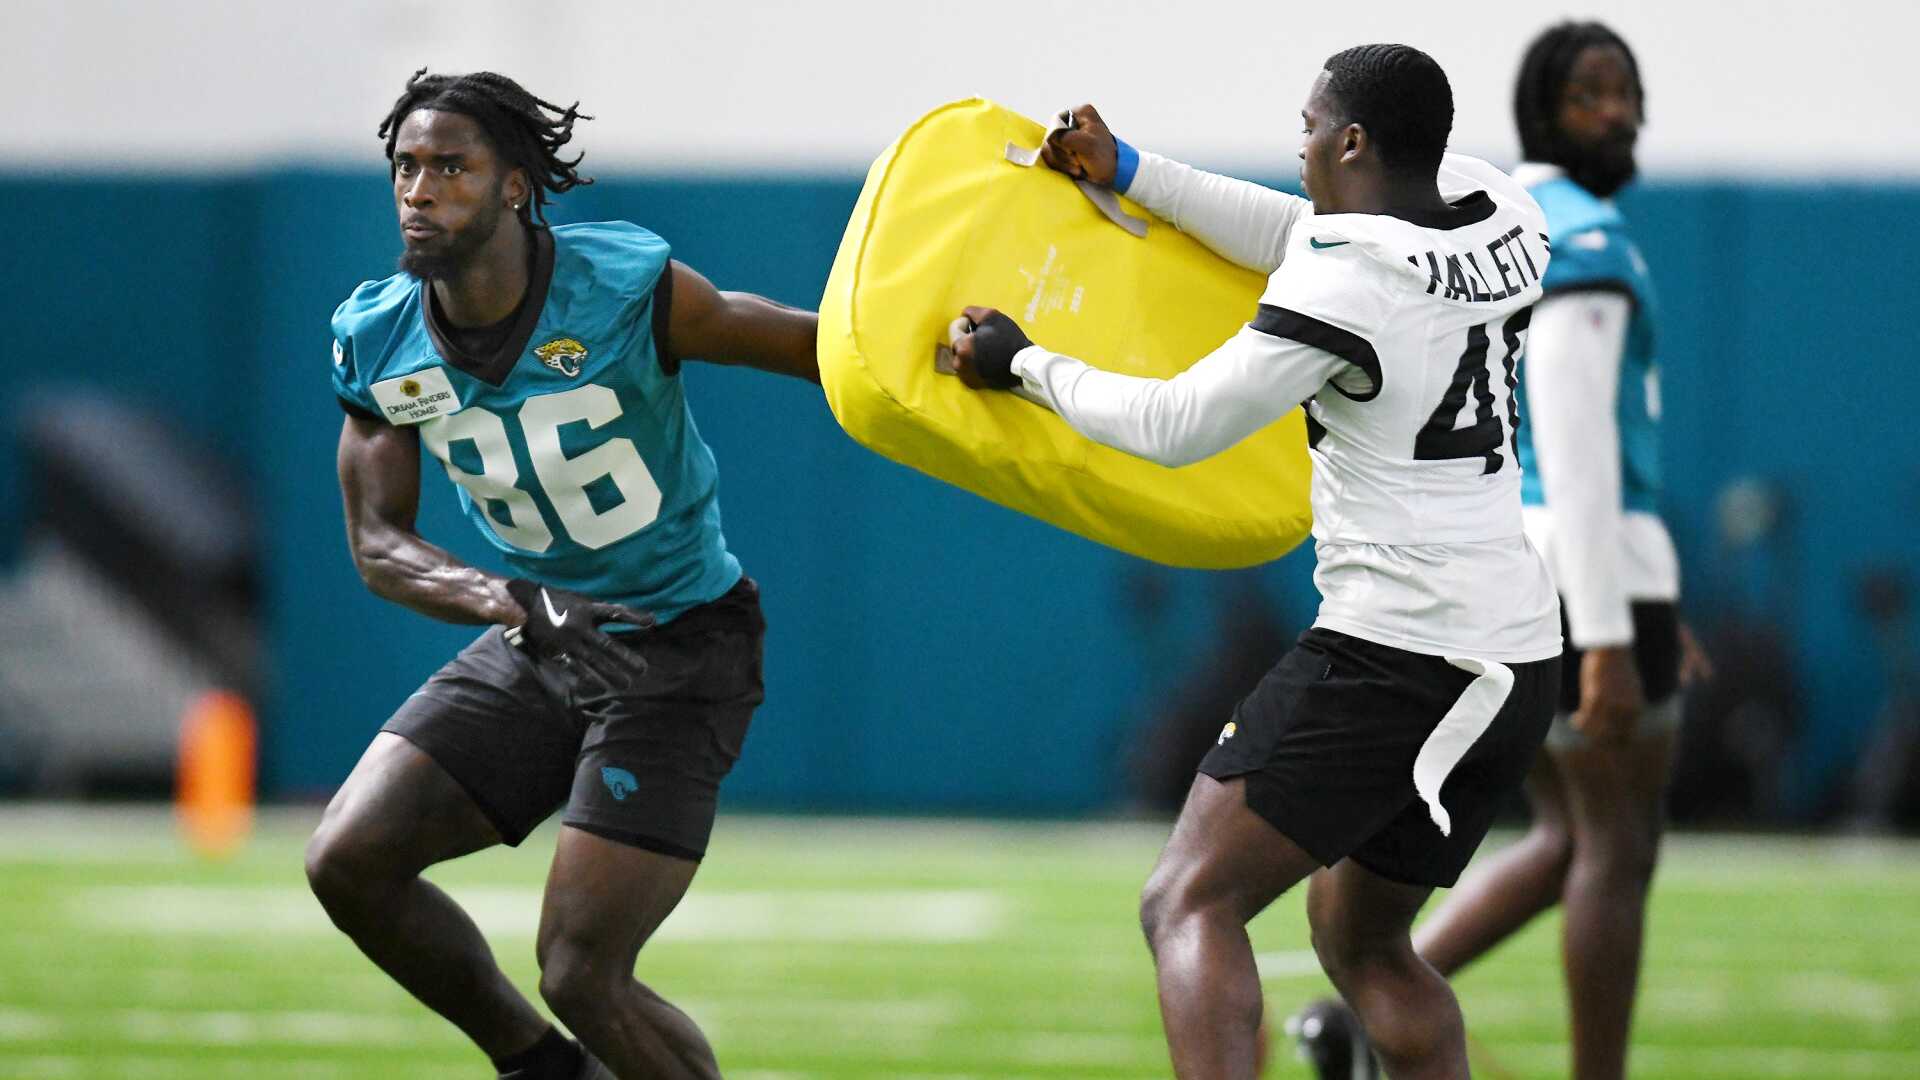 Jags rookie WR David White Jr. tore his ACL